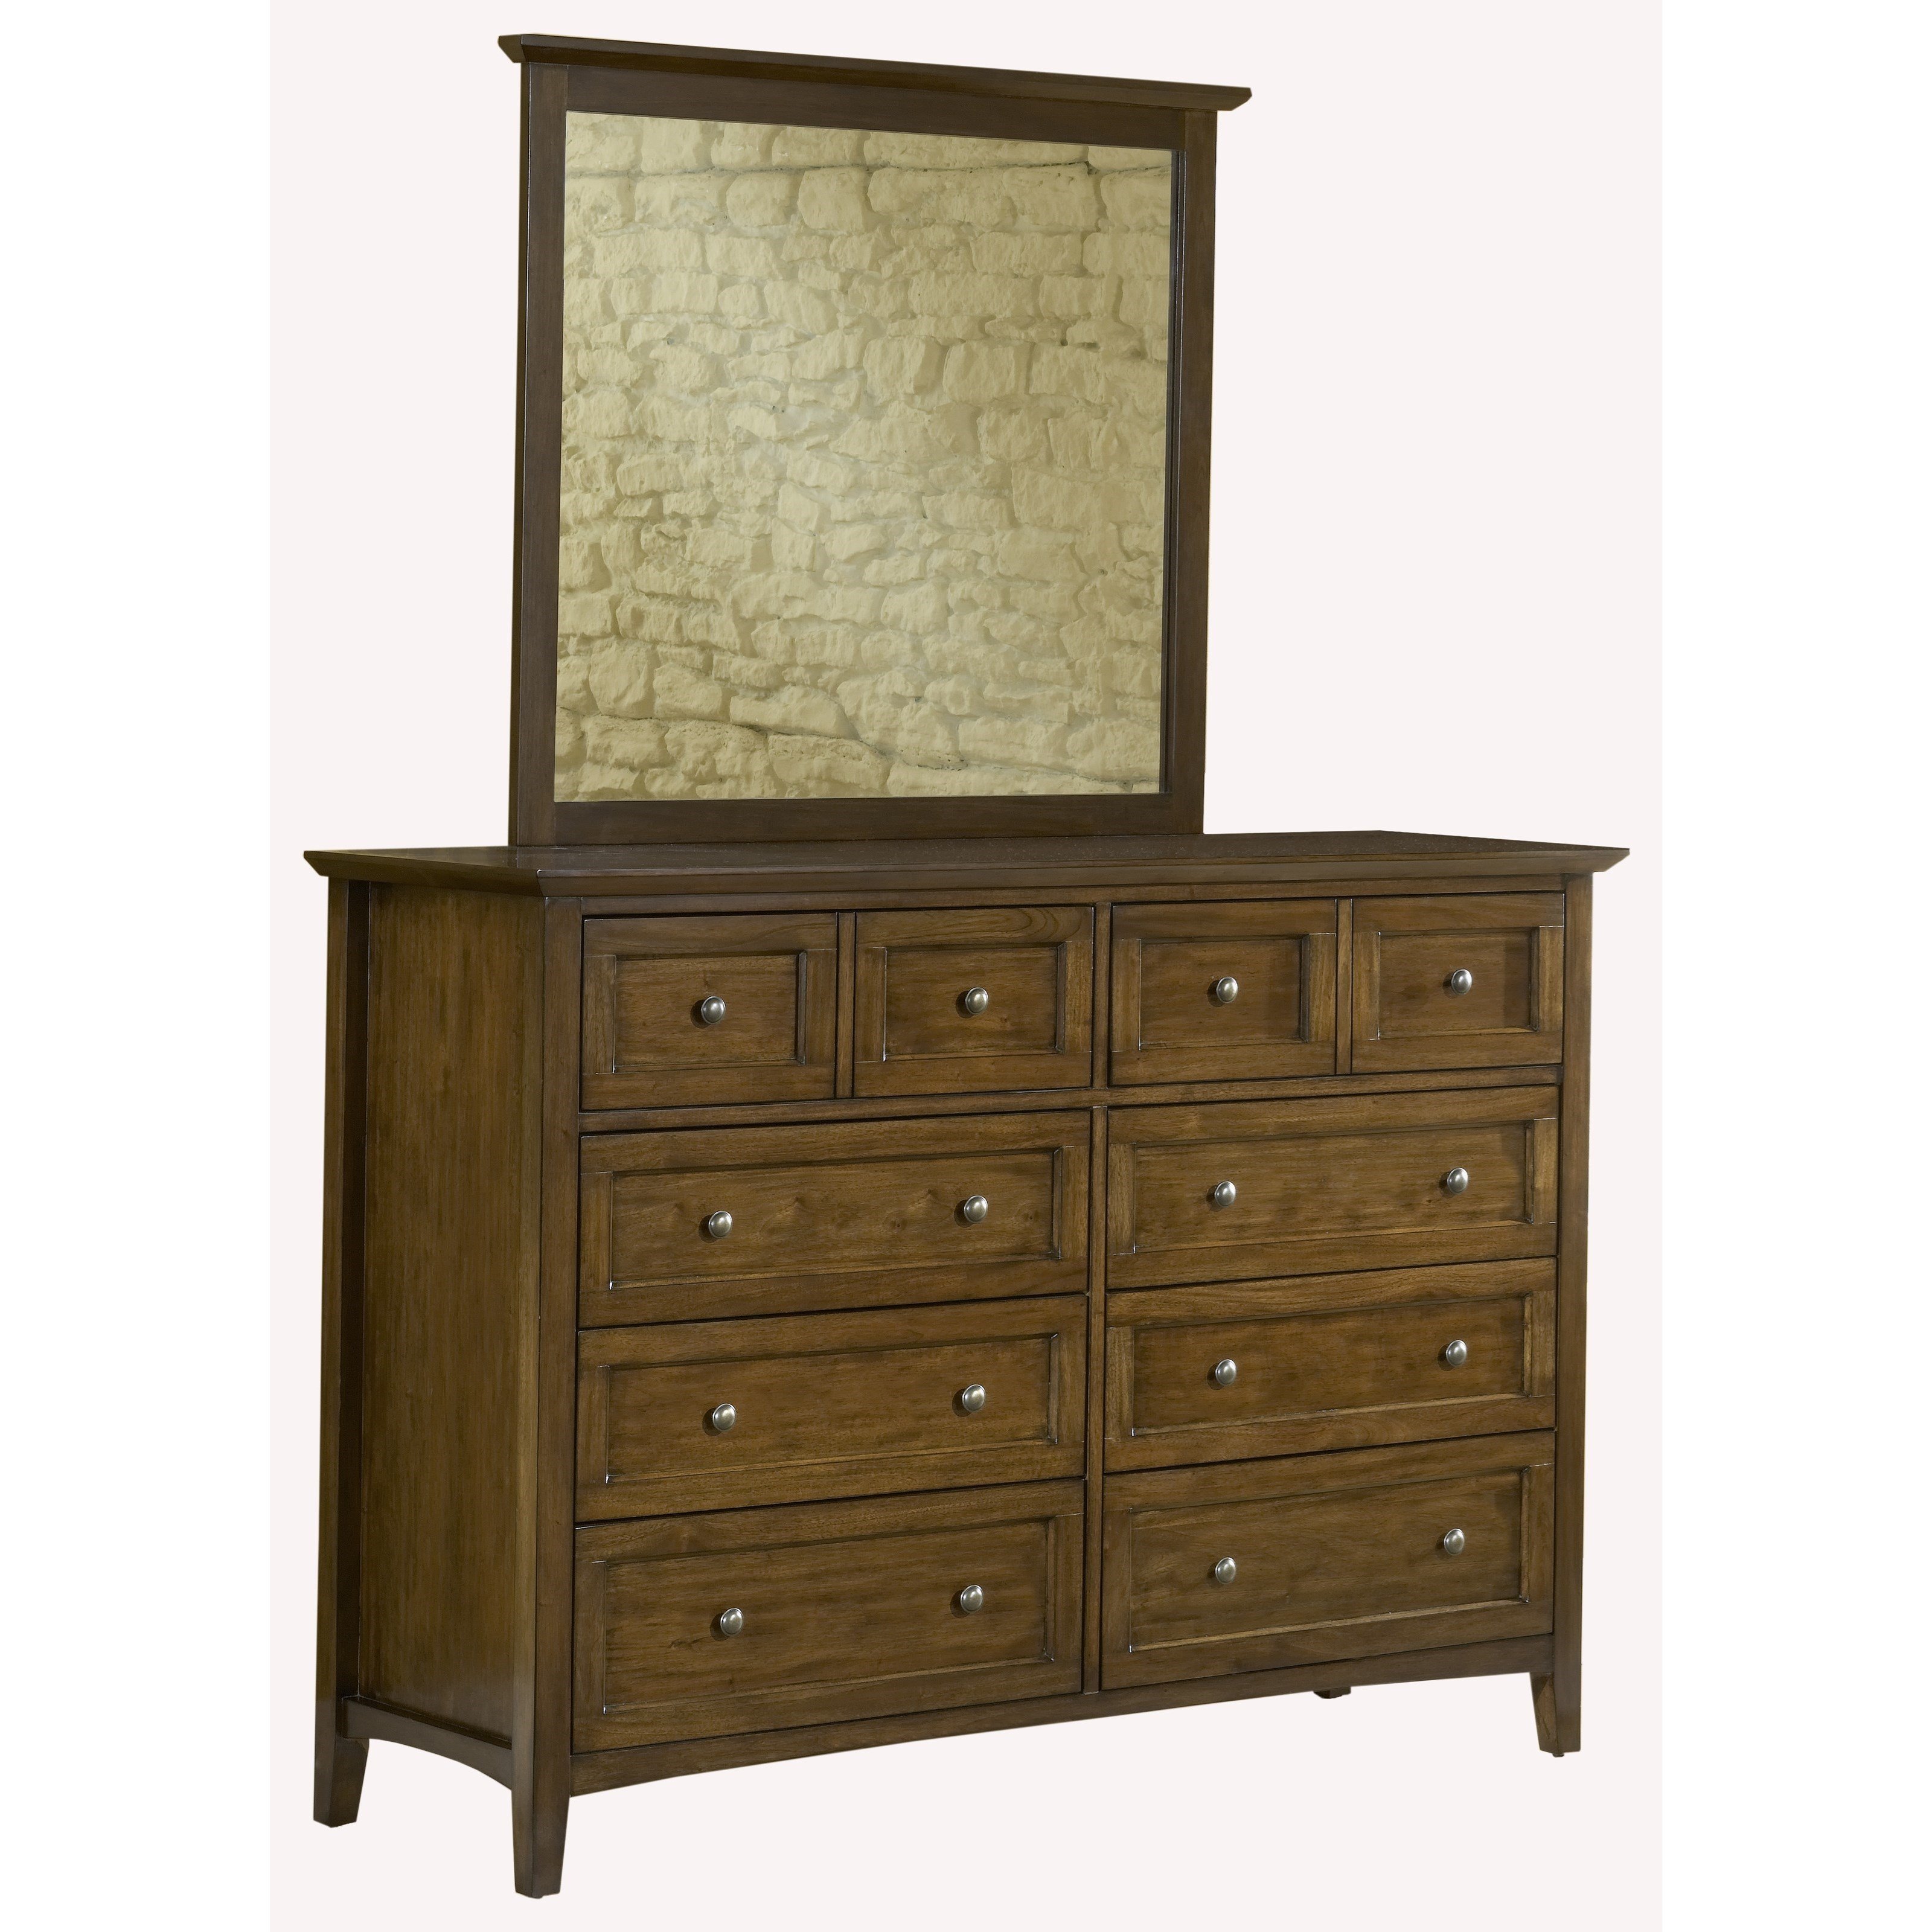 Viven 6PC E King Bed, 2 Nightstand, Dresser, Mirror & Chest Set in Mahogany Spice - image 4 of 6